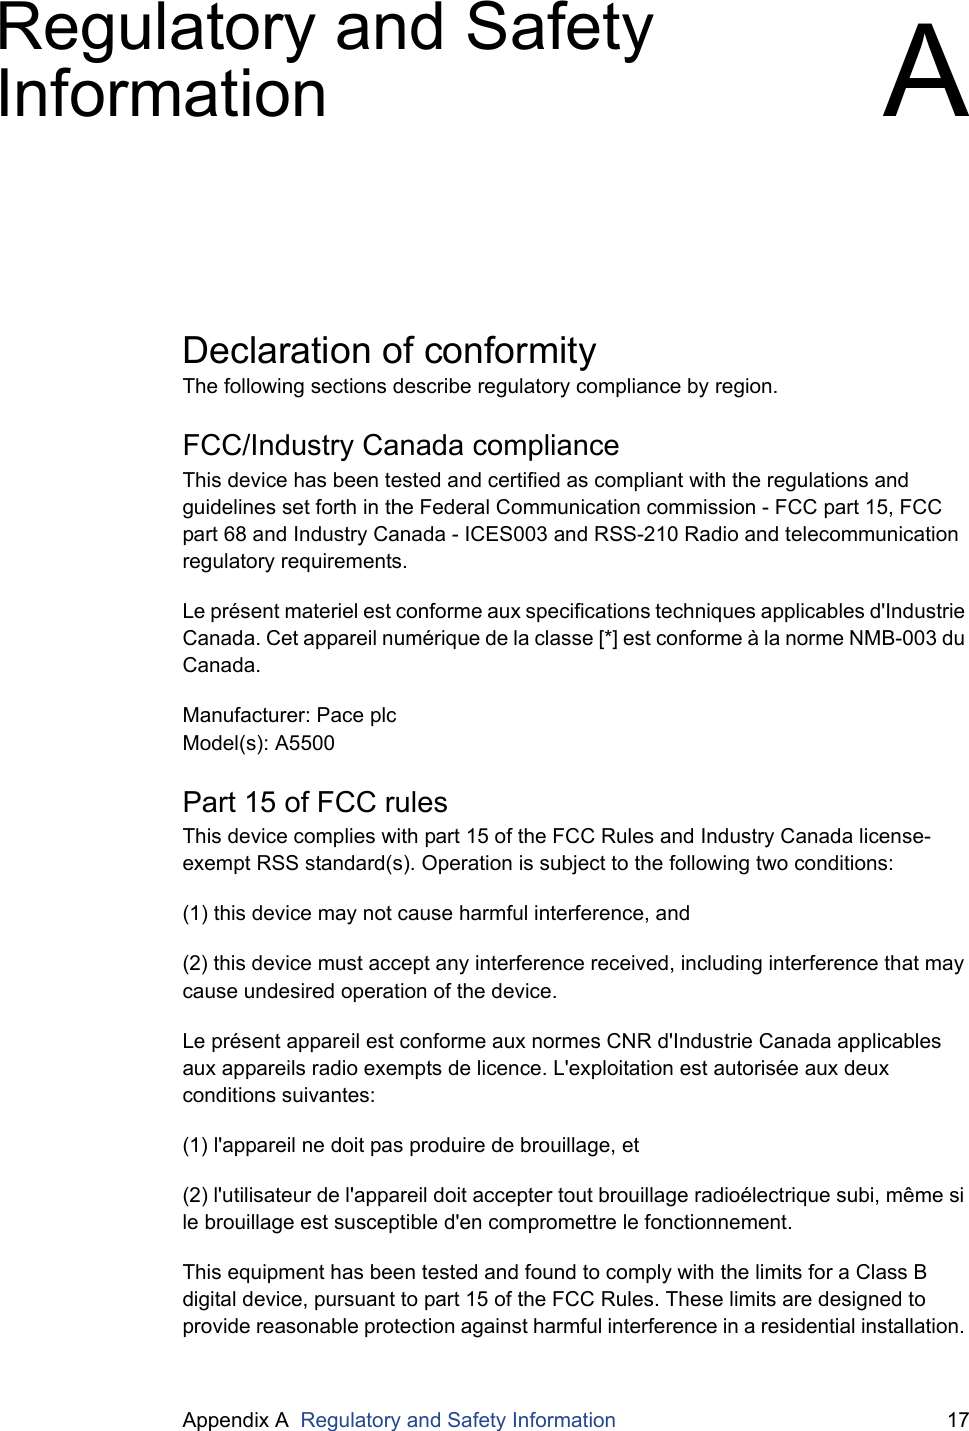 Appendix A  Regulatory and Safety Information 17Regulatory and Safety Information ADeclaration of conformityThe following sections describe regulatory compliance by region.FCC/Industry Canada complianceThis device has been tested and certified as compliant with the regulations and guidelines set forth in the Federal Communication commission - FCC part 15, FCC part 68 and Industry Canada - ICES003 and RSS-210 Radio and telecommunication regulatory requirements.Le présent materiel est conforme aux specifications techniques applicables d&apos;Industrie Canada. Cet appareil numérique de la classe [*] est conforme à la norme NMB-003 du Canada.Manufacturer: Pace plcModel(s): A5500Part 15 of FCC rulesThis device complies with part 15 of the FCC Rules and Industry Canada license-exempt RSS standard(s). Operation is subject to the following two conditions: (1) this device may not cause harmful interference, and(2) this device must accept any interference received, including interference that may cause undesired operation of the device.Le présent appareil est conforme aux normes CNR d&apos;Industrie Canada applicables aux appareils radio exempts de licence. L&apos;exploitation est autorisée aux deux conditions suivantes:(1) l&apos;appareil ne doit pas produire de brouillage, et(2) l&apos;utilisateur de l&apos;appareil doit accepter tout brouillage radioélectrique subi, même si le brouillage est susceptible d&apos;en compromettre le fonctionnement.This equipment has been tested and found to comply with the limits for a Class B digital device, pursuant to part 15 of the FCC Rules. These limits are designed to provide reasonable protection against harmful interference in a residential installation. 